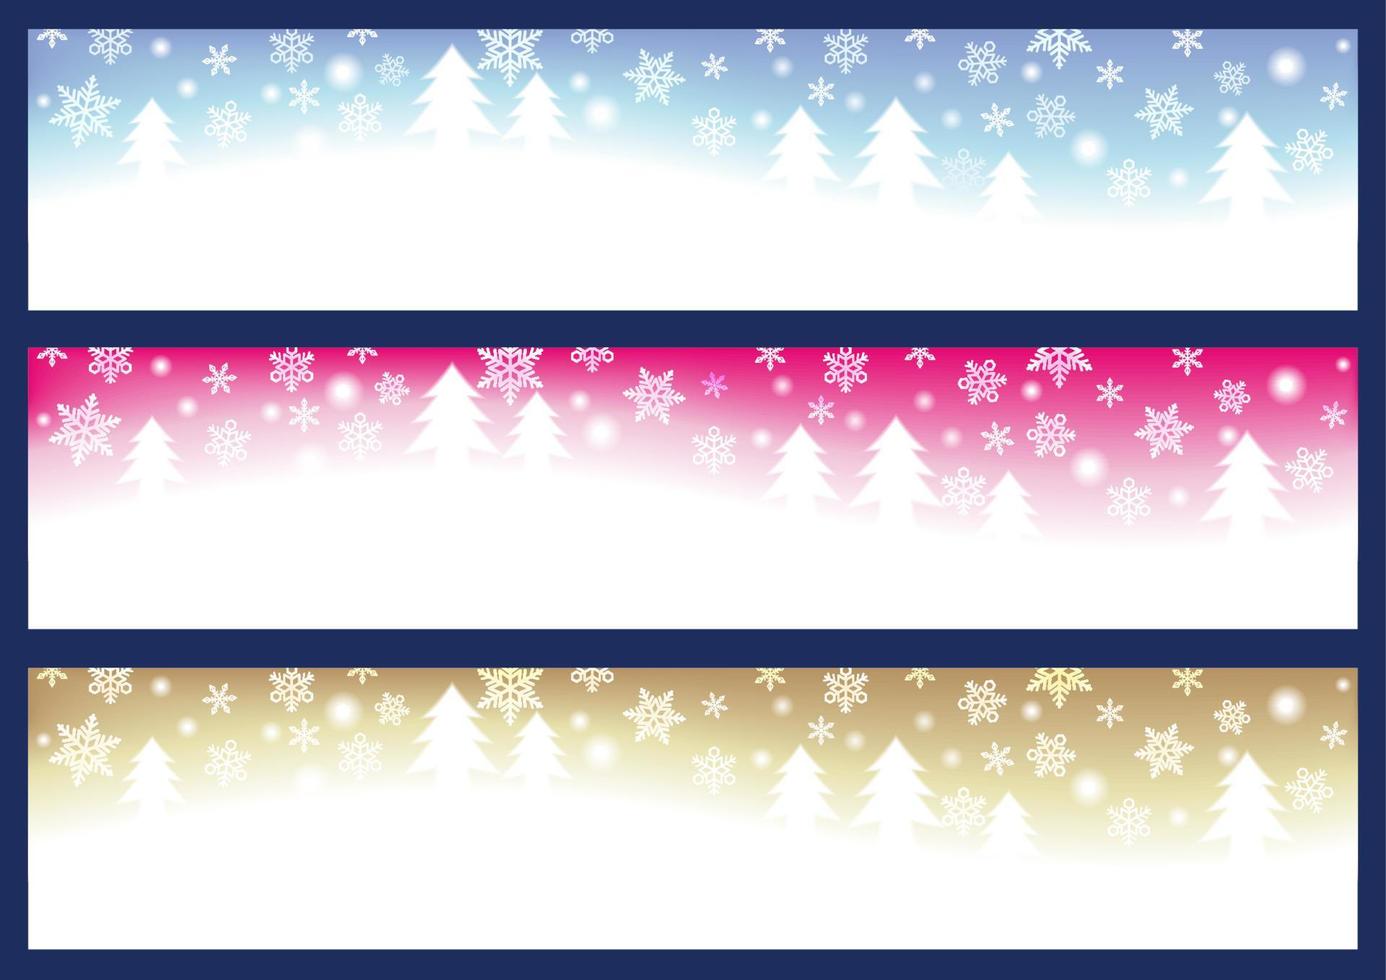 Vector Winter Forest Christmas Background Illustration Set Isolated On A Dark Background.